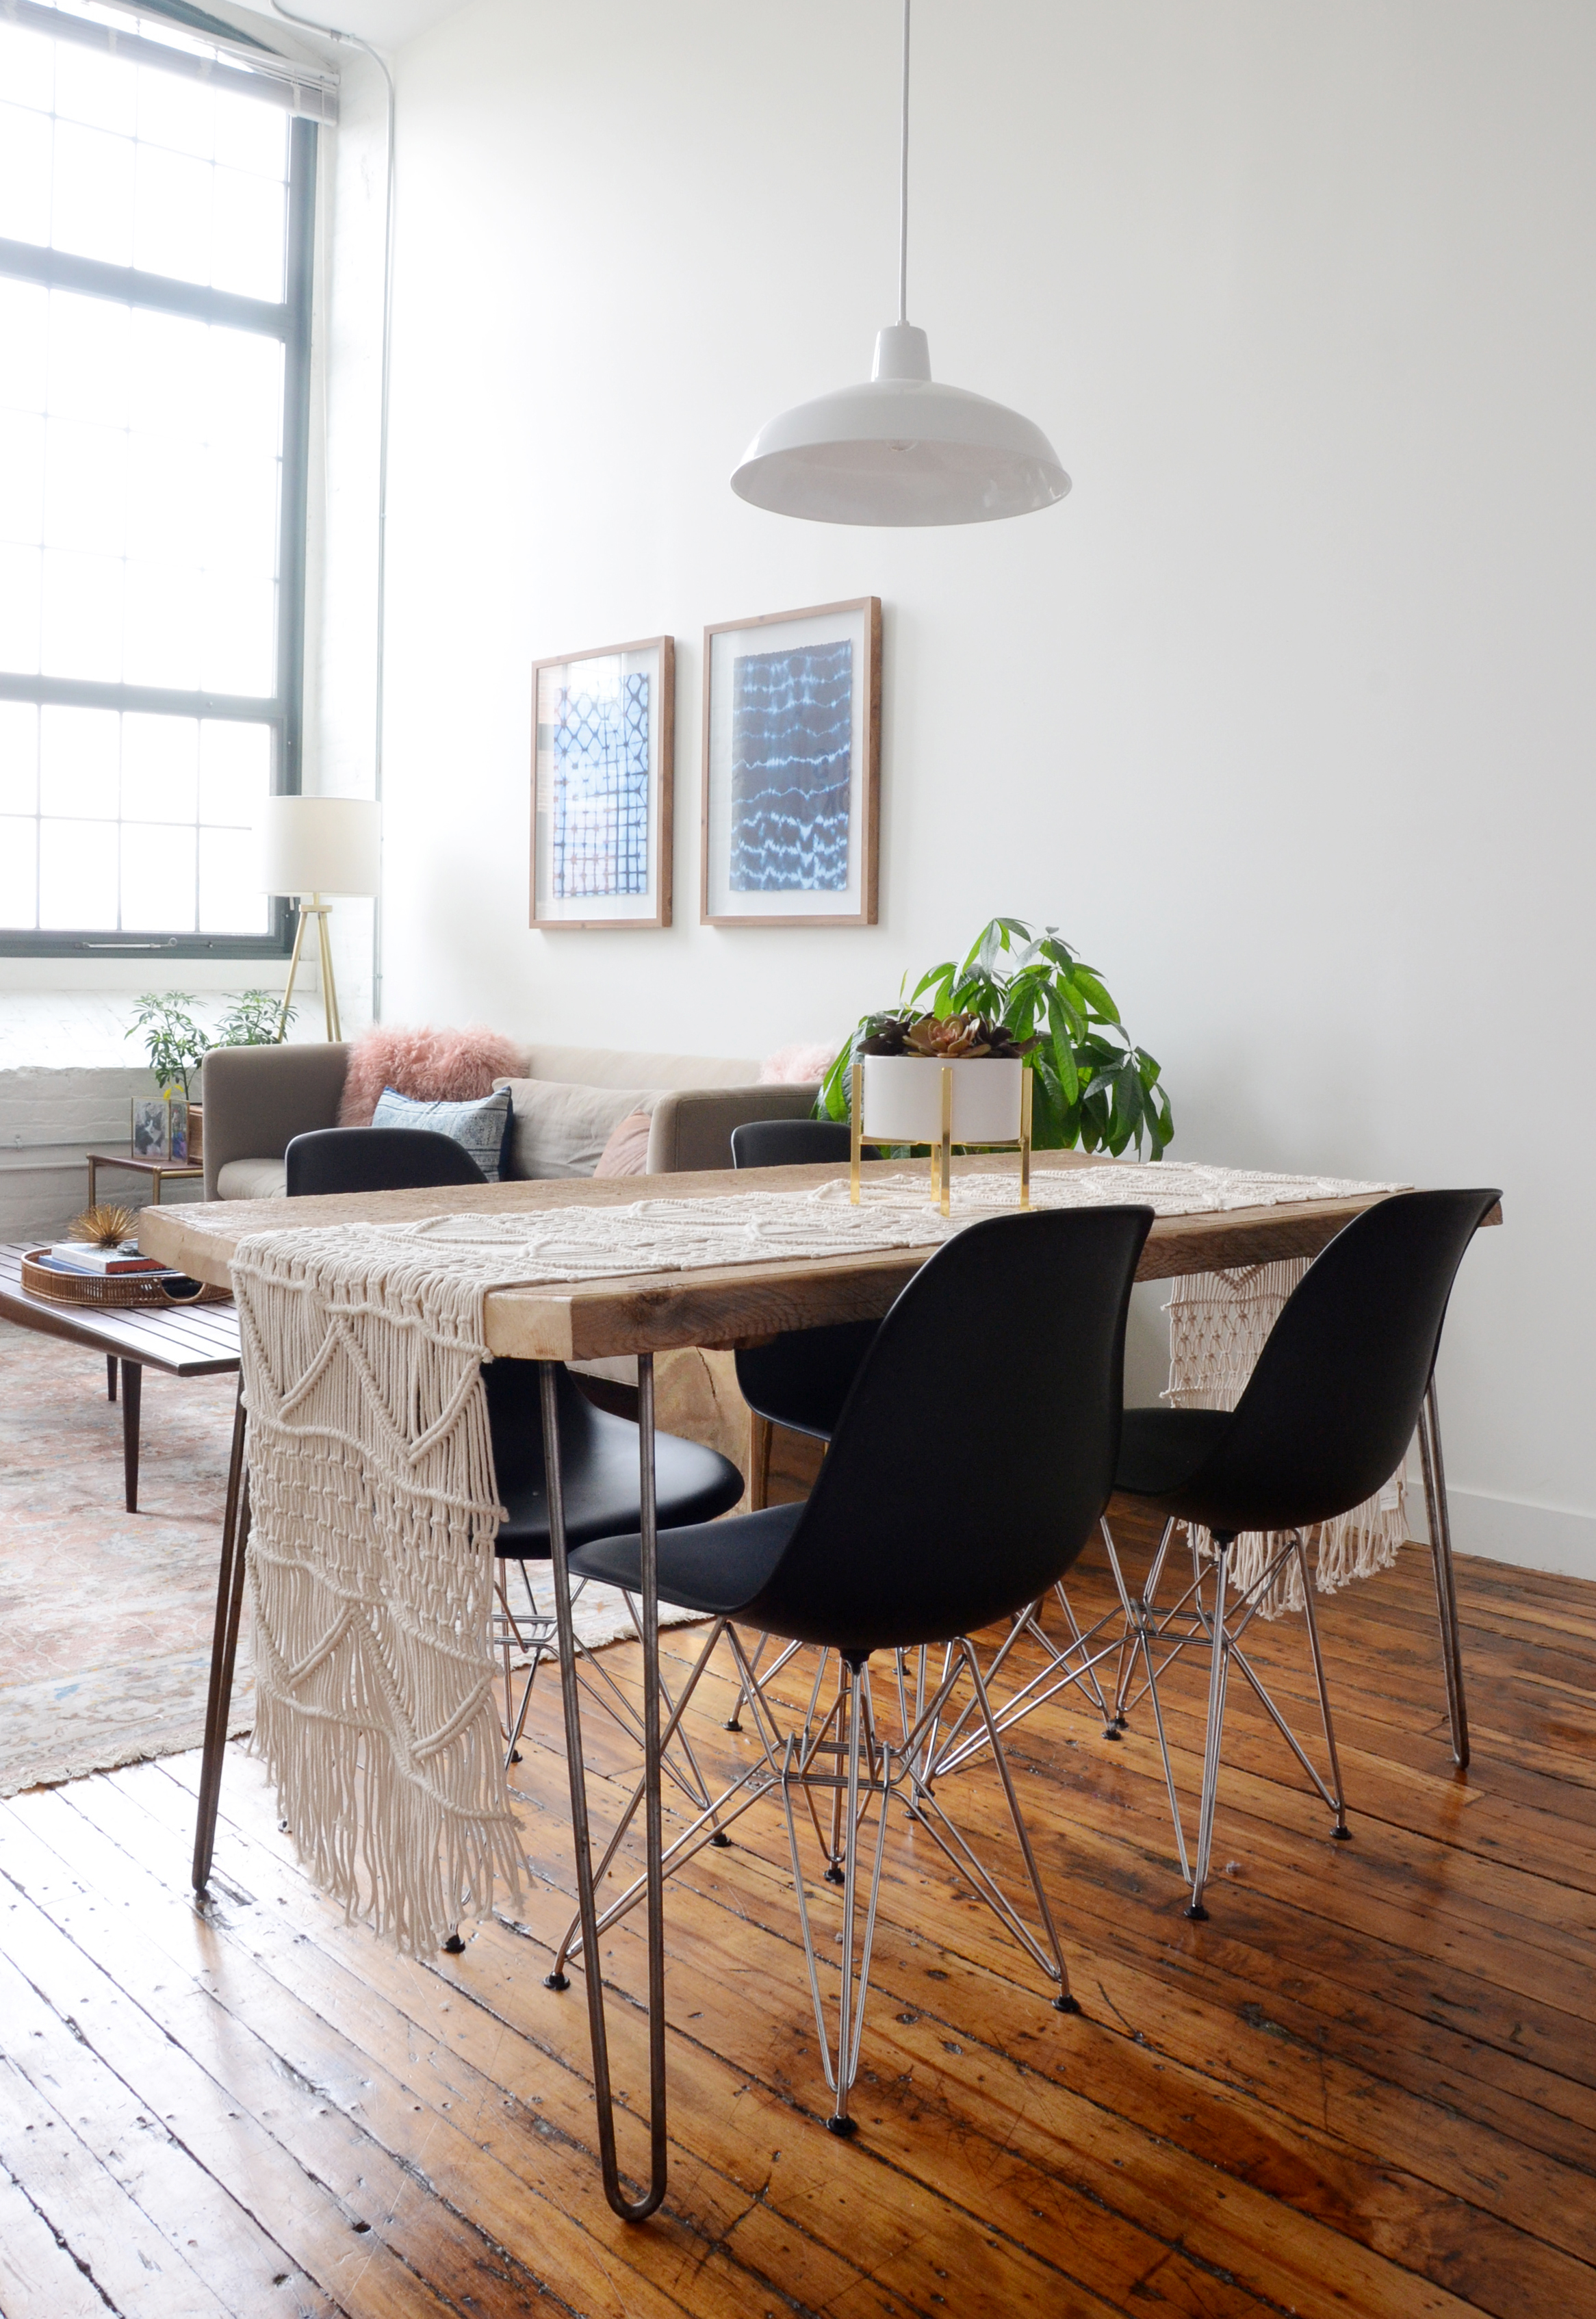 Inspiring Home Tours: My Latest Houzz Articles /// By Design Fixation